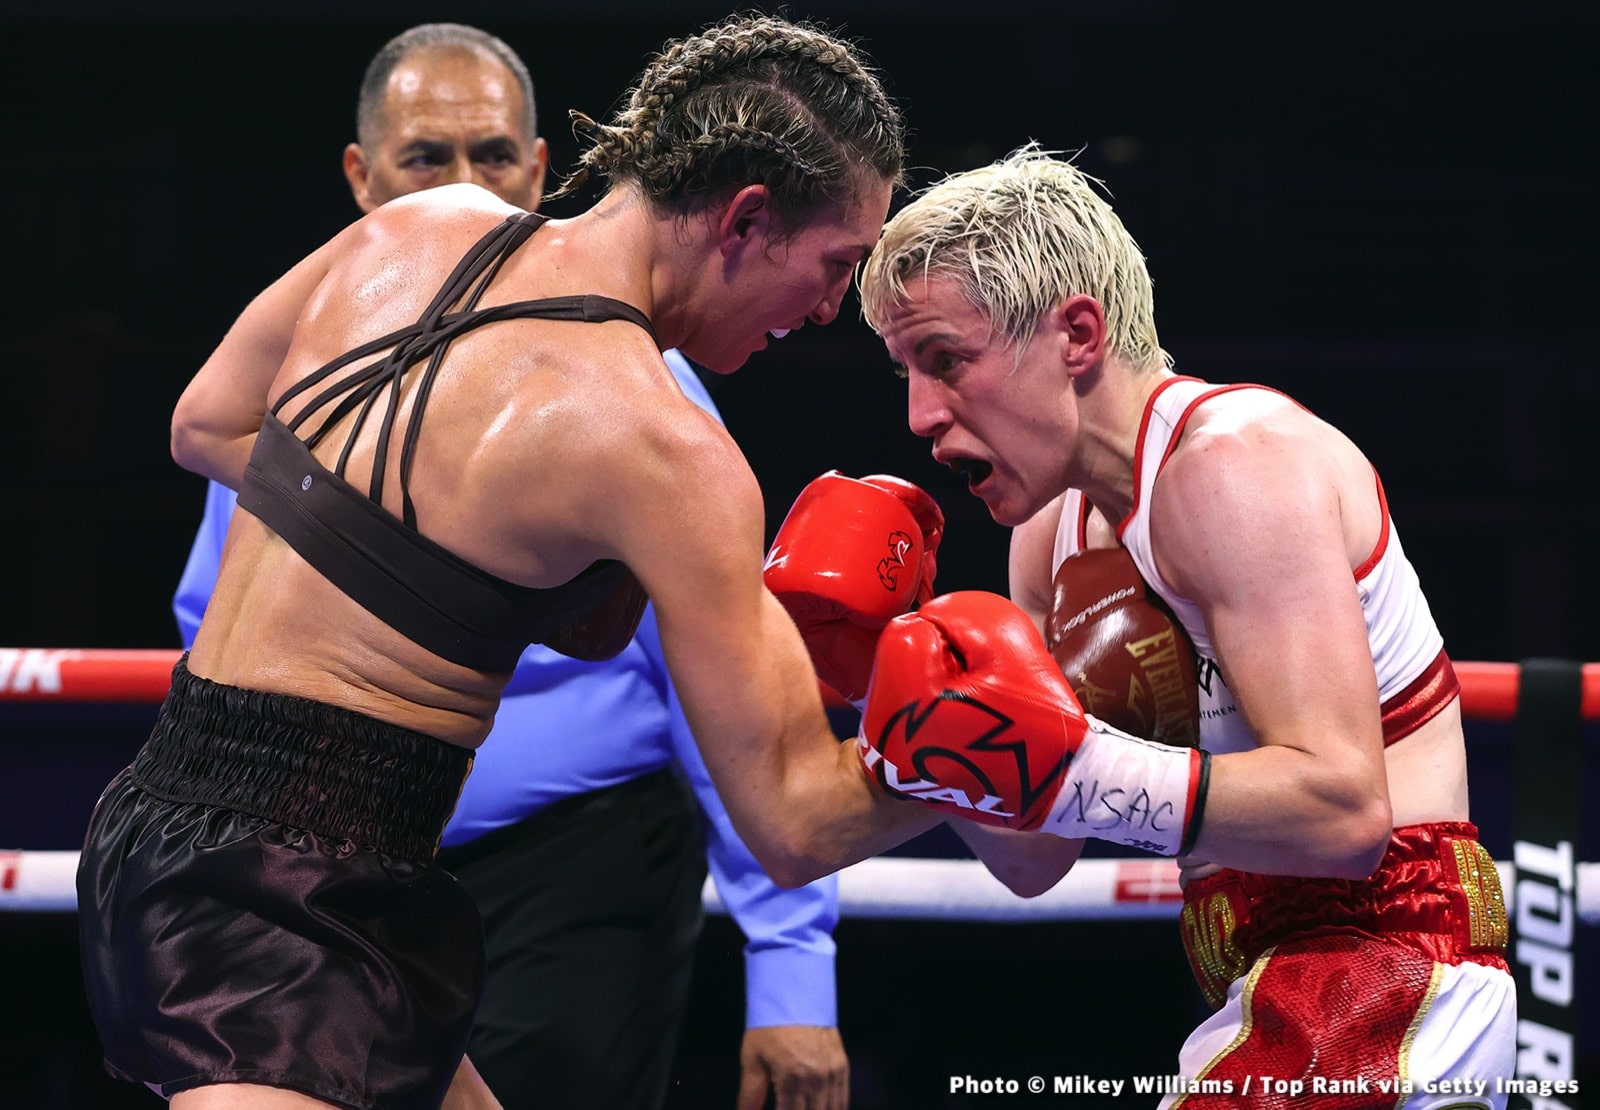 Unfathomable Official Scoring Spoils Epic Female Battle Between Mayer and Hamadouche